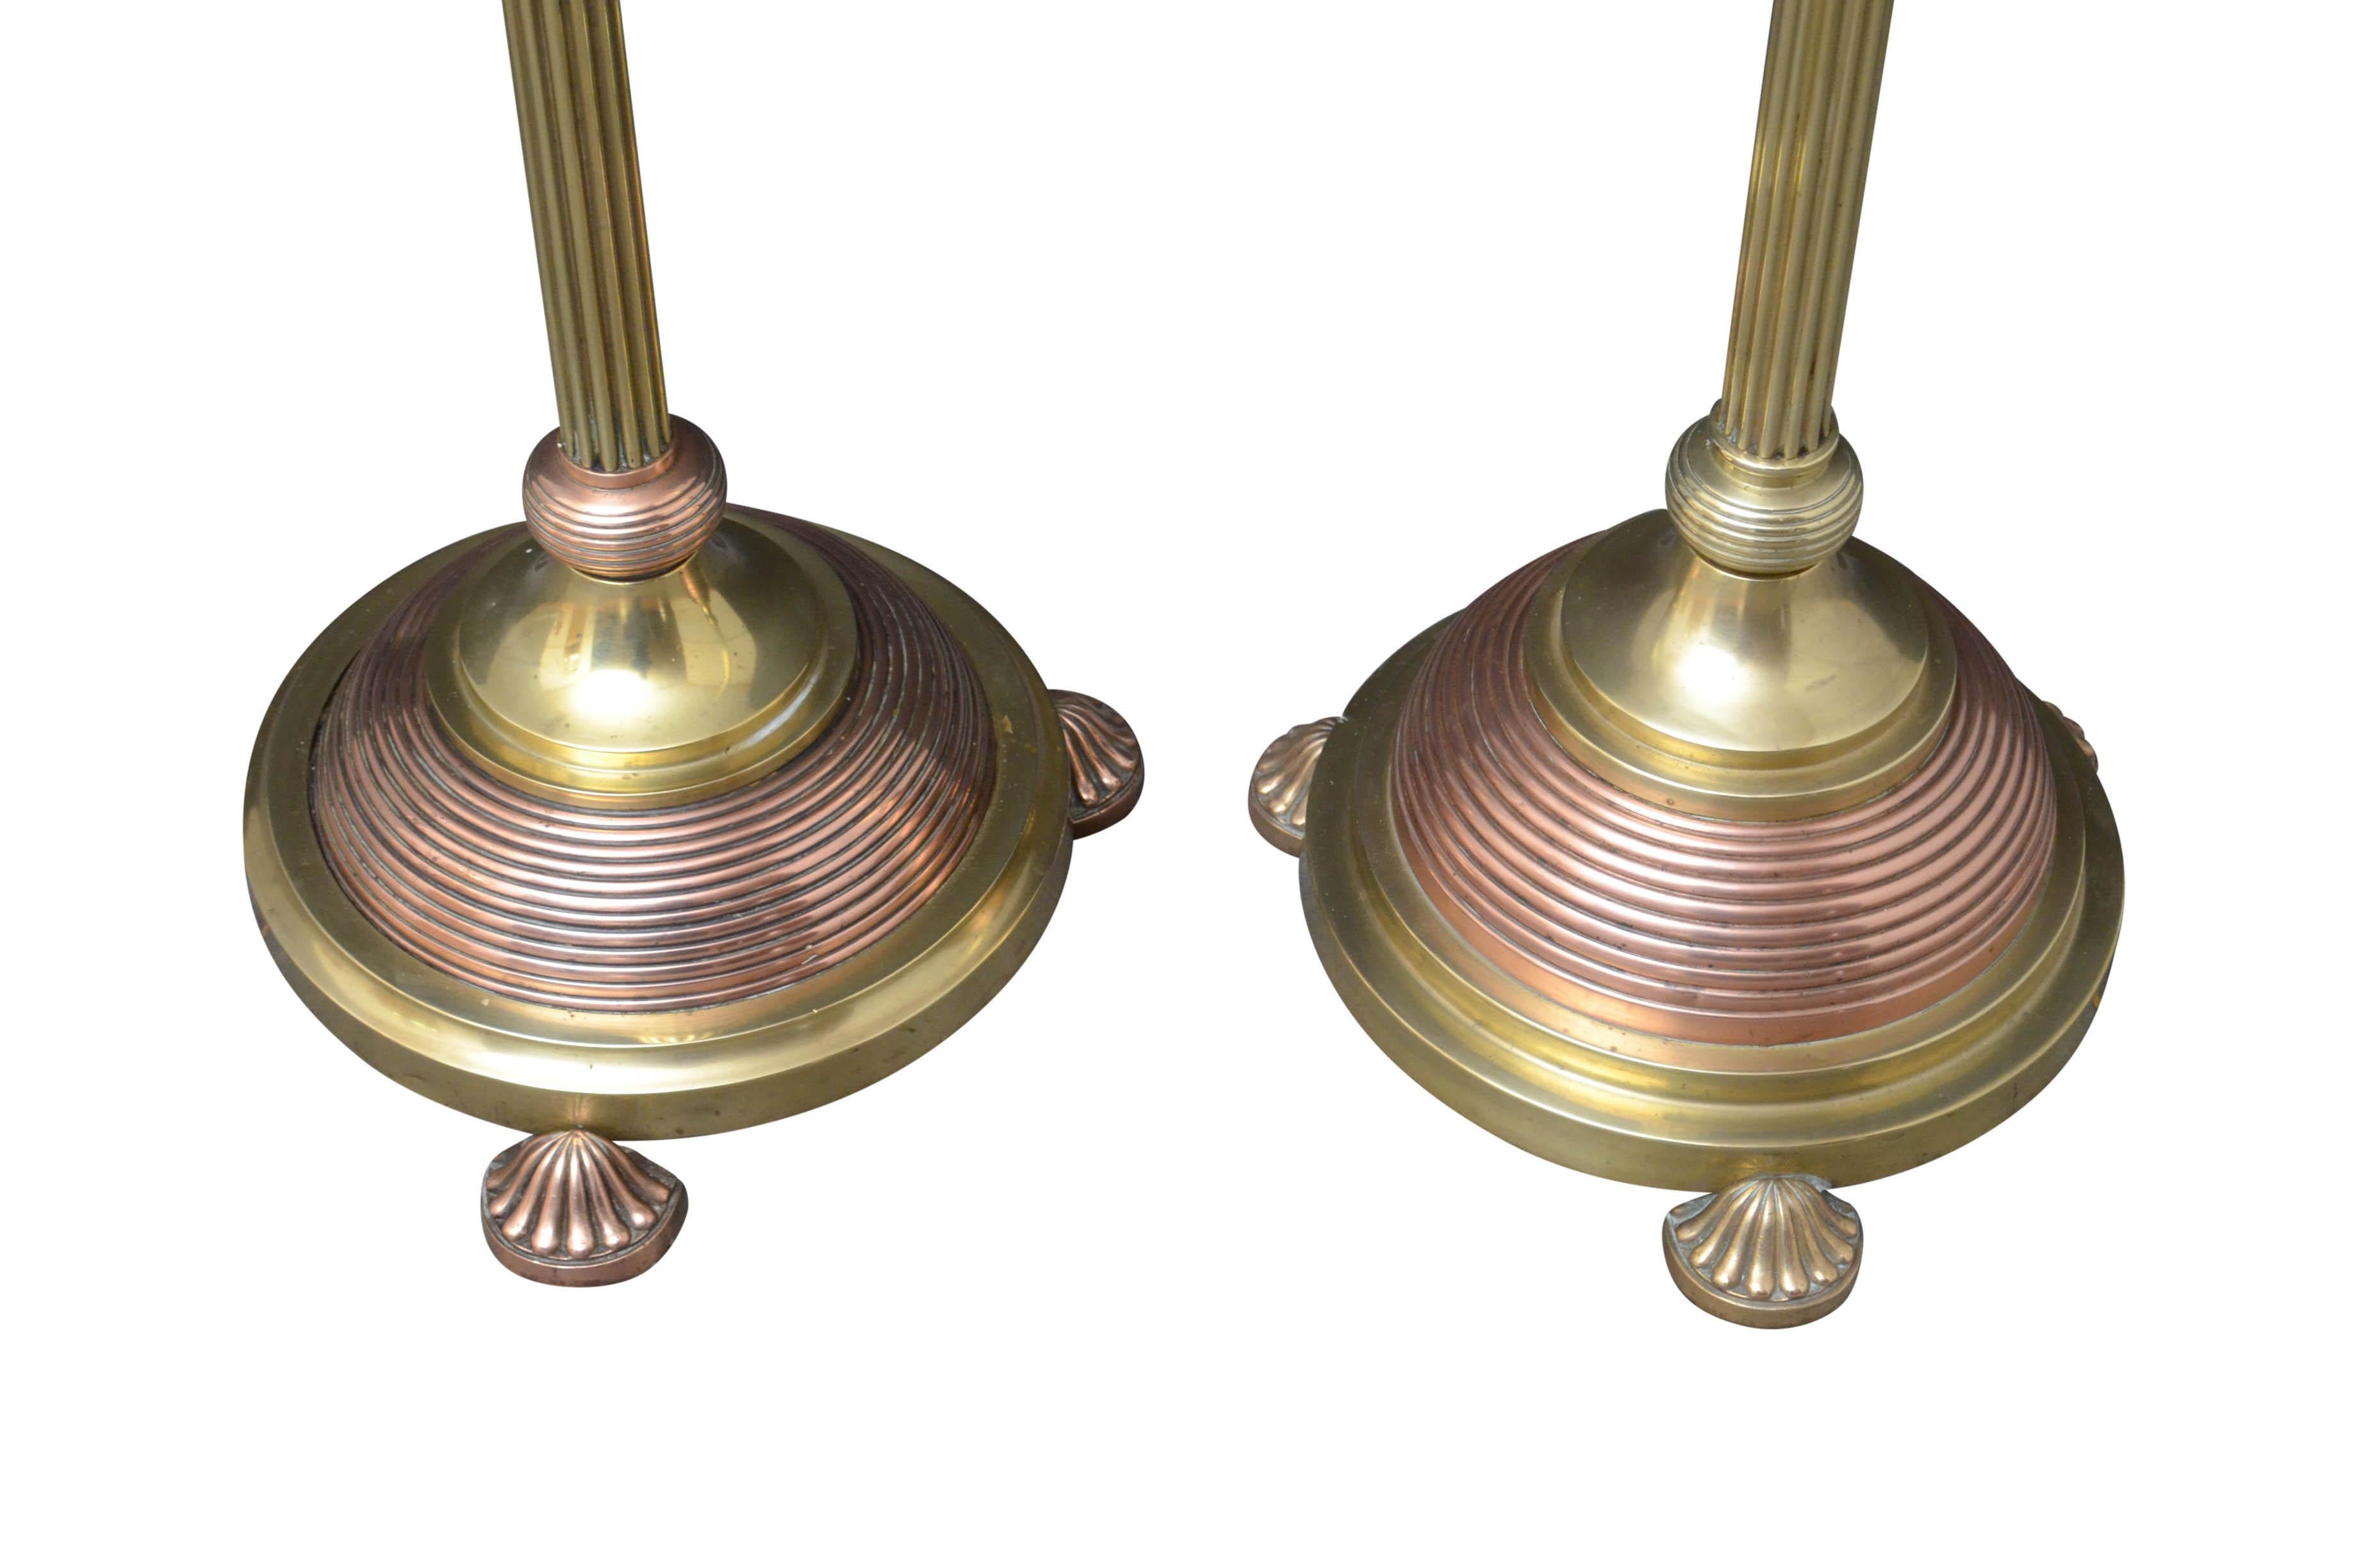 Matched Pair of Edwardian Copper And Brass Floor Standard Lamps 6